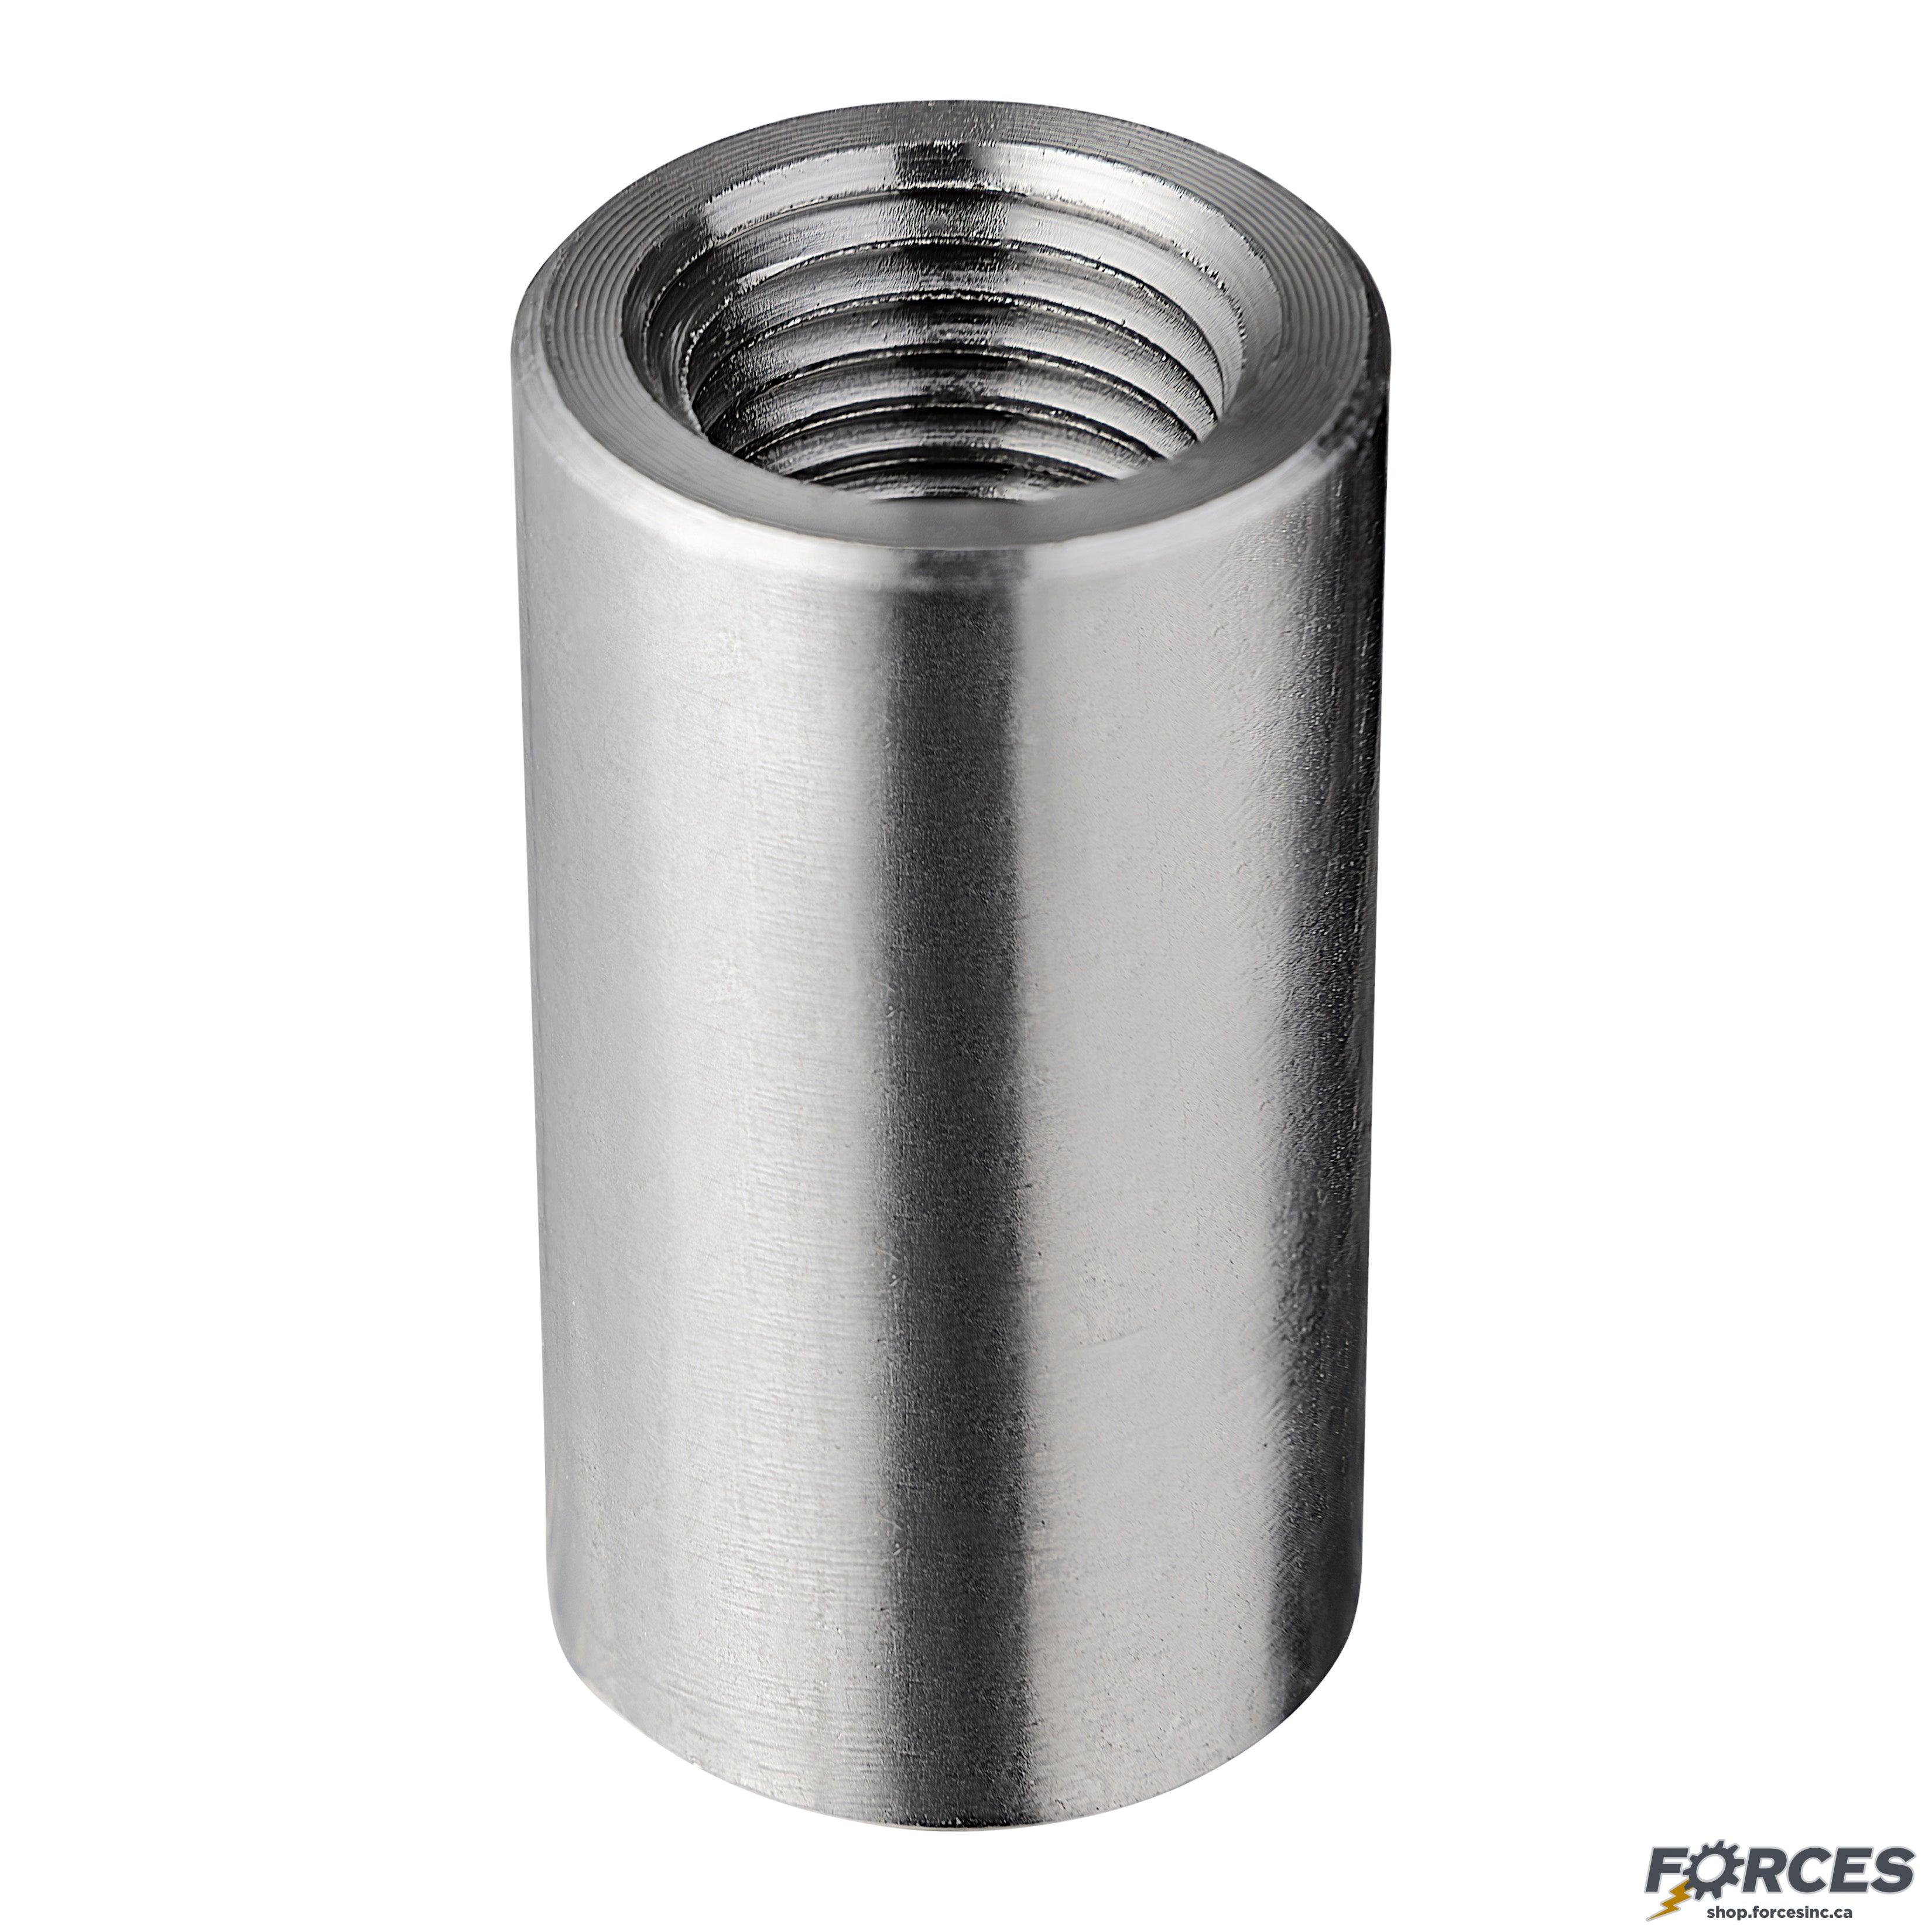 1-1/4" Full Coupling NPT #3000 - Stainless Steel 316 - Forces Inc